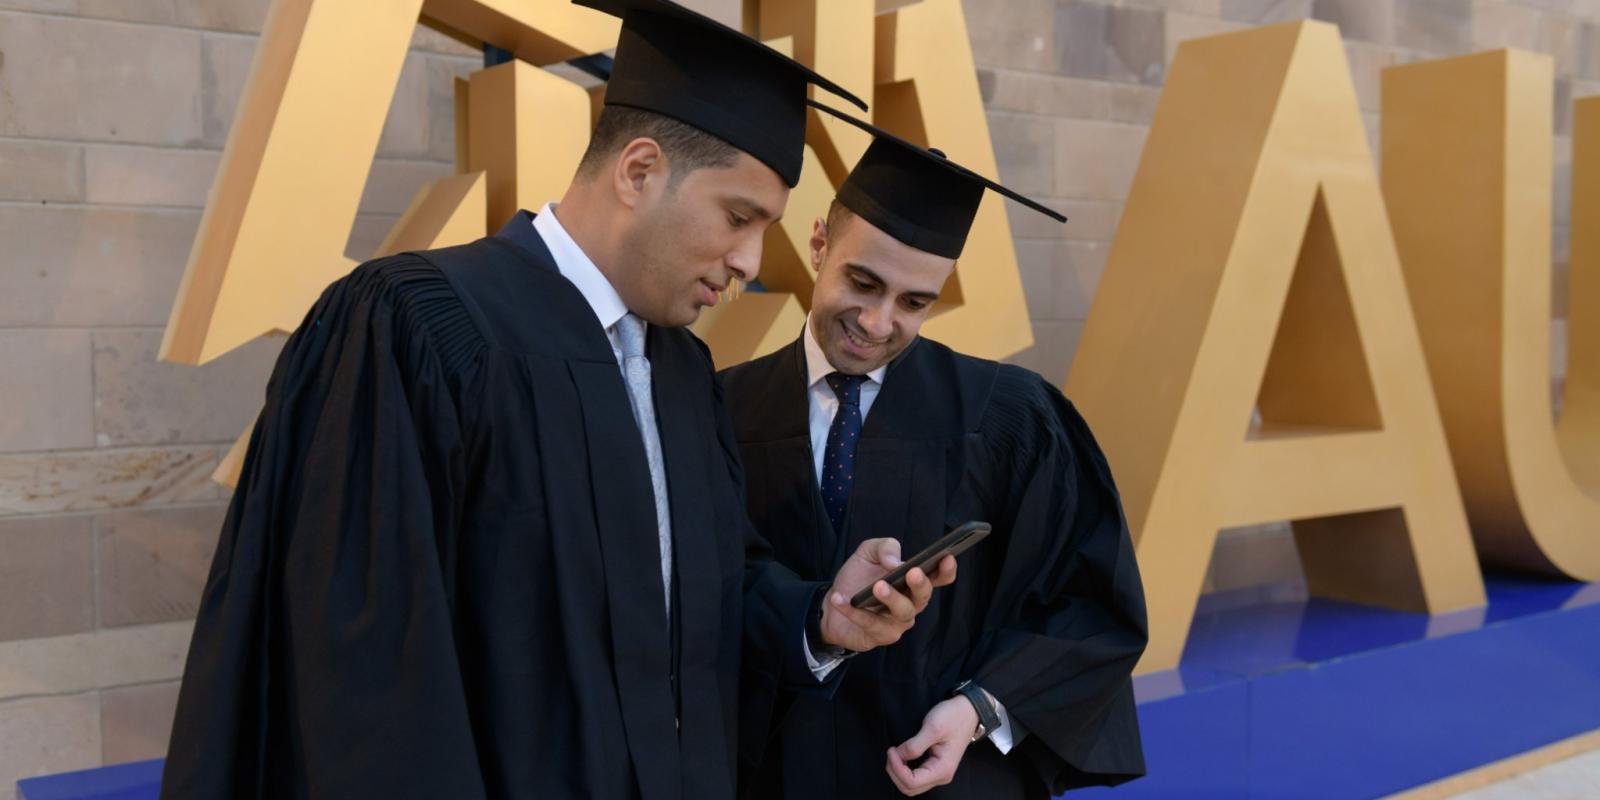 Two male graduates in their caps and gowns